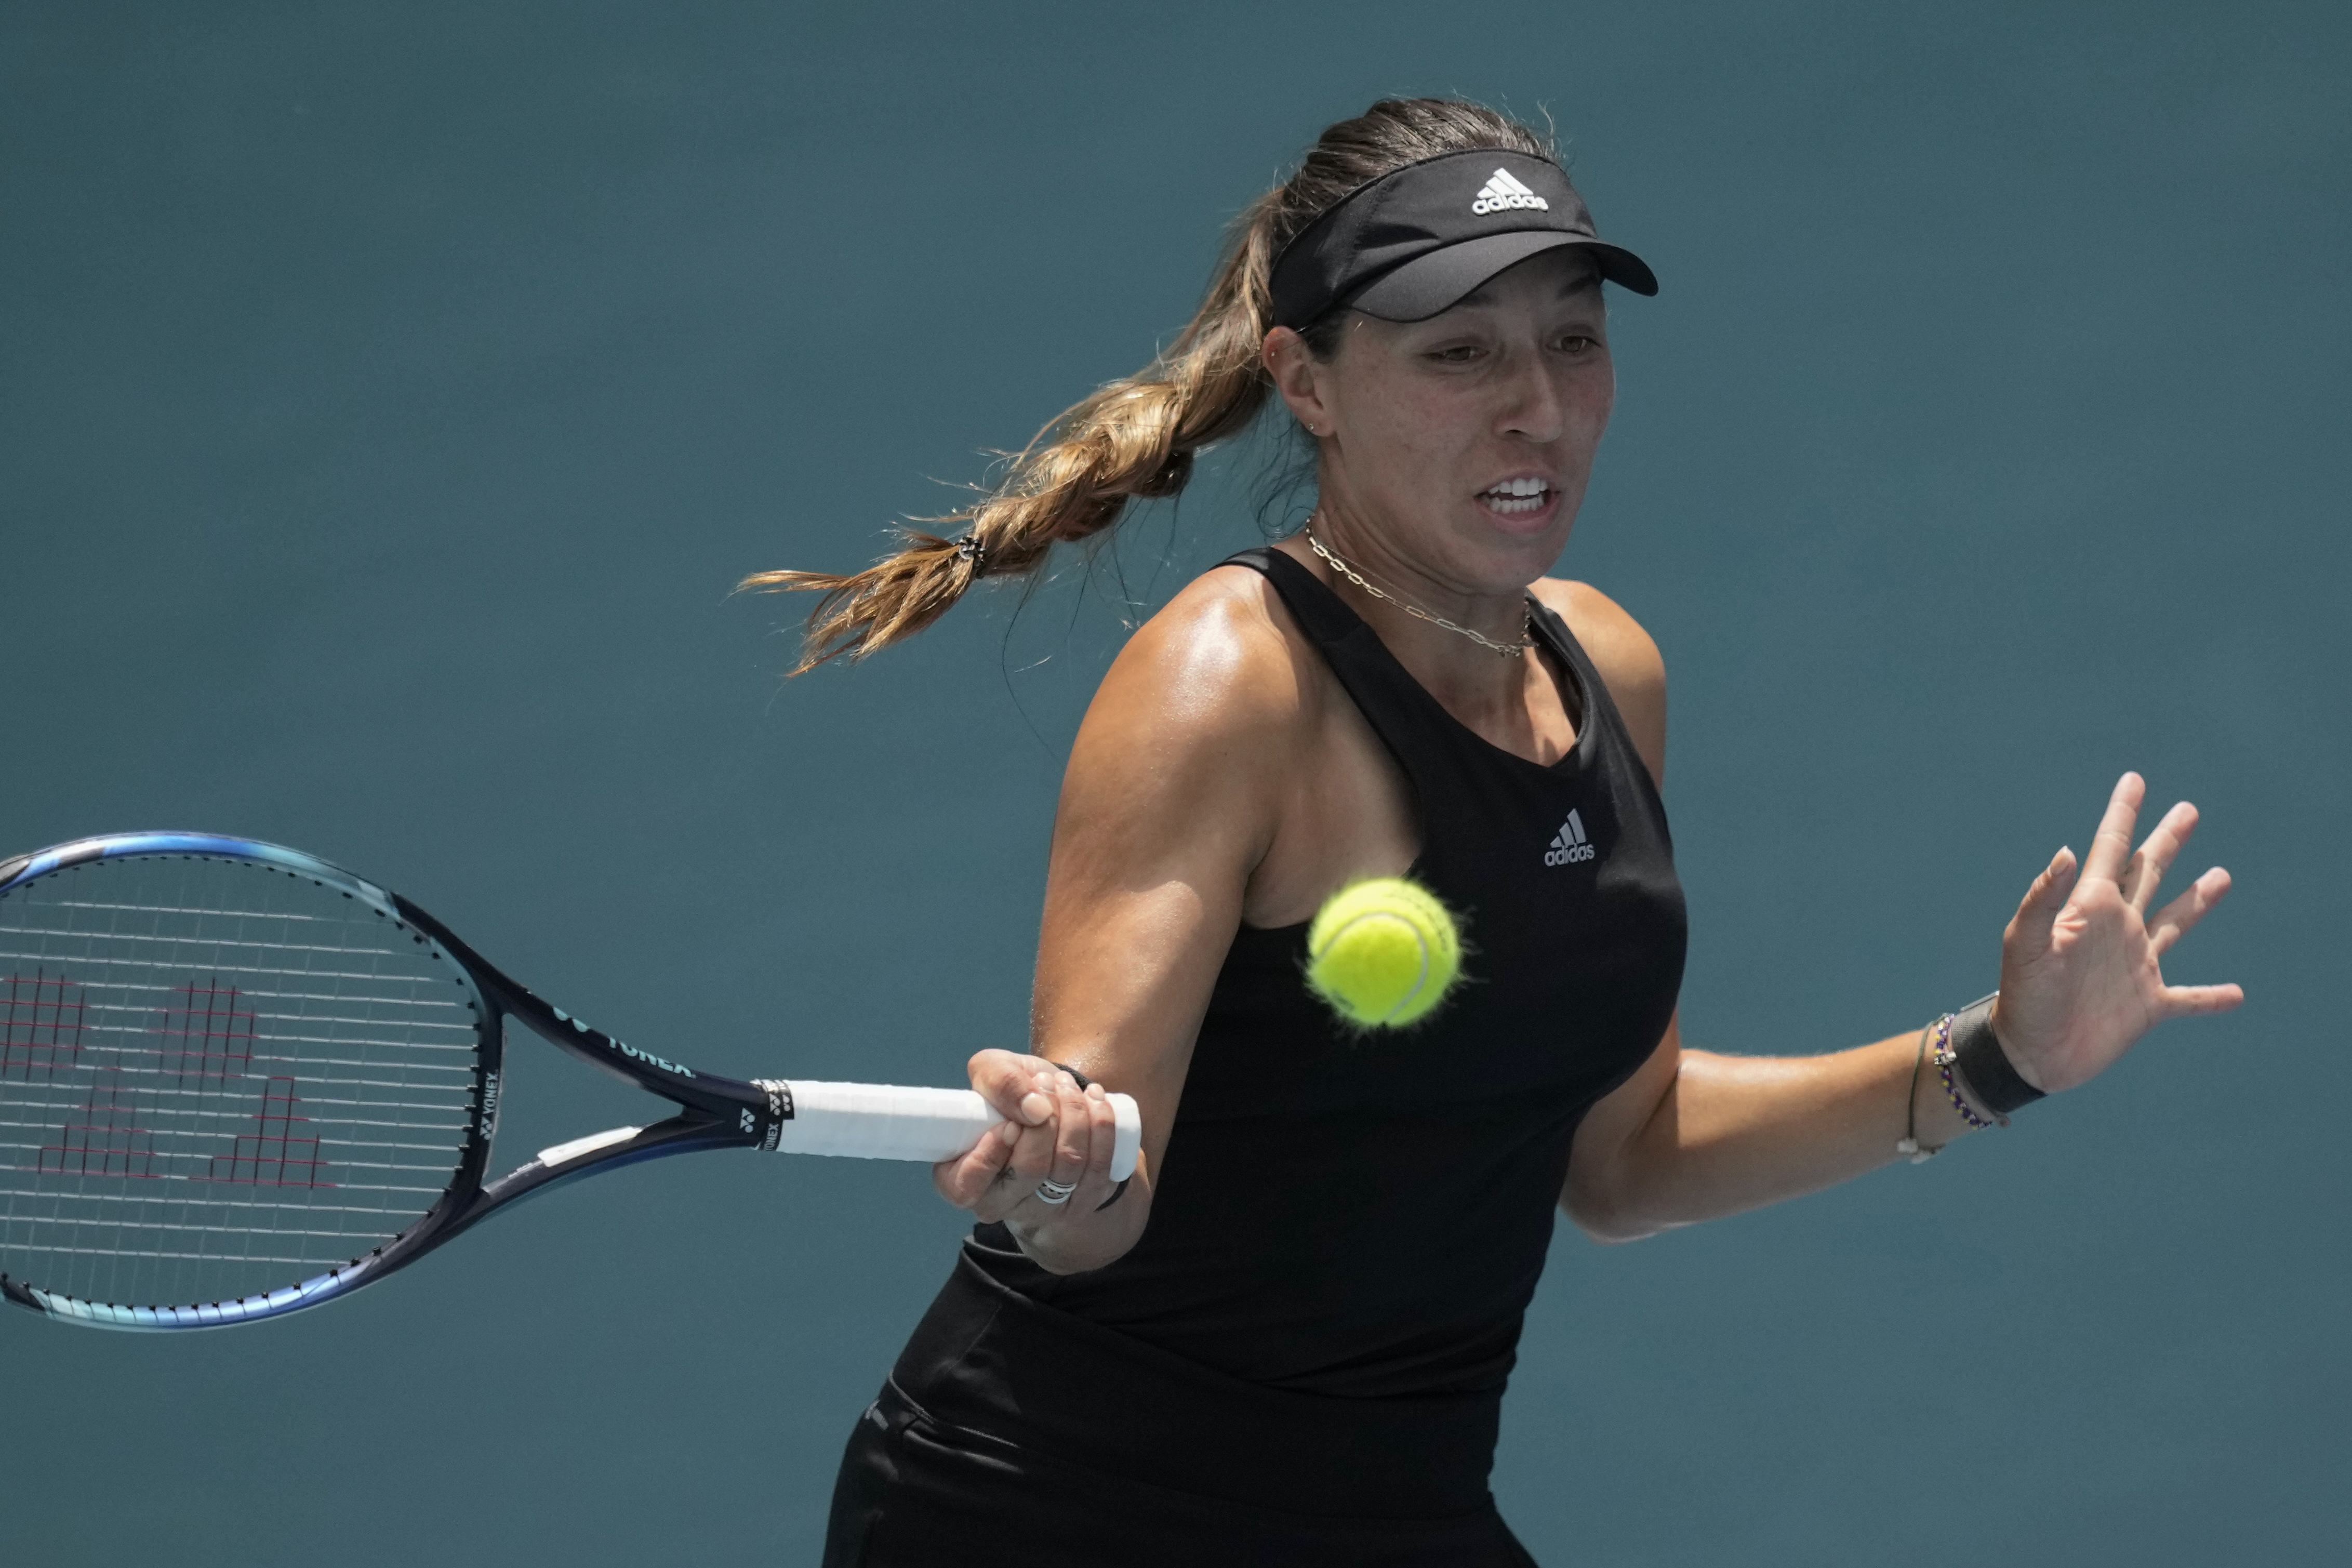 Miami Open Masters 2022 Results: Jessica Pegula's Win and Wednesday's Highlights News, Scores, Highlights, Stats, and Rumors | Bleacher Report